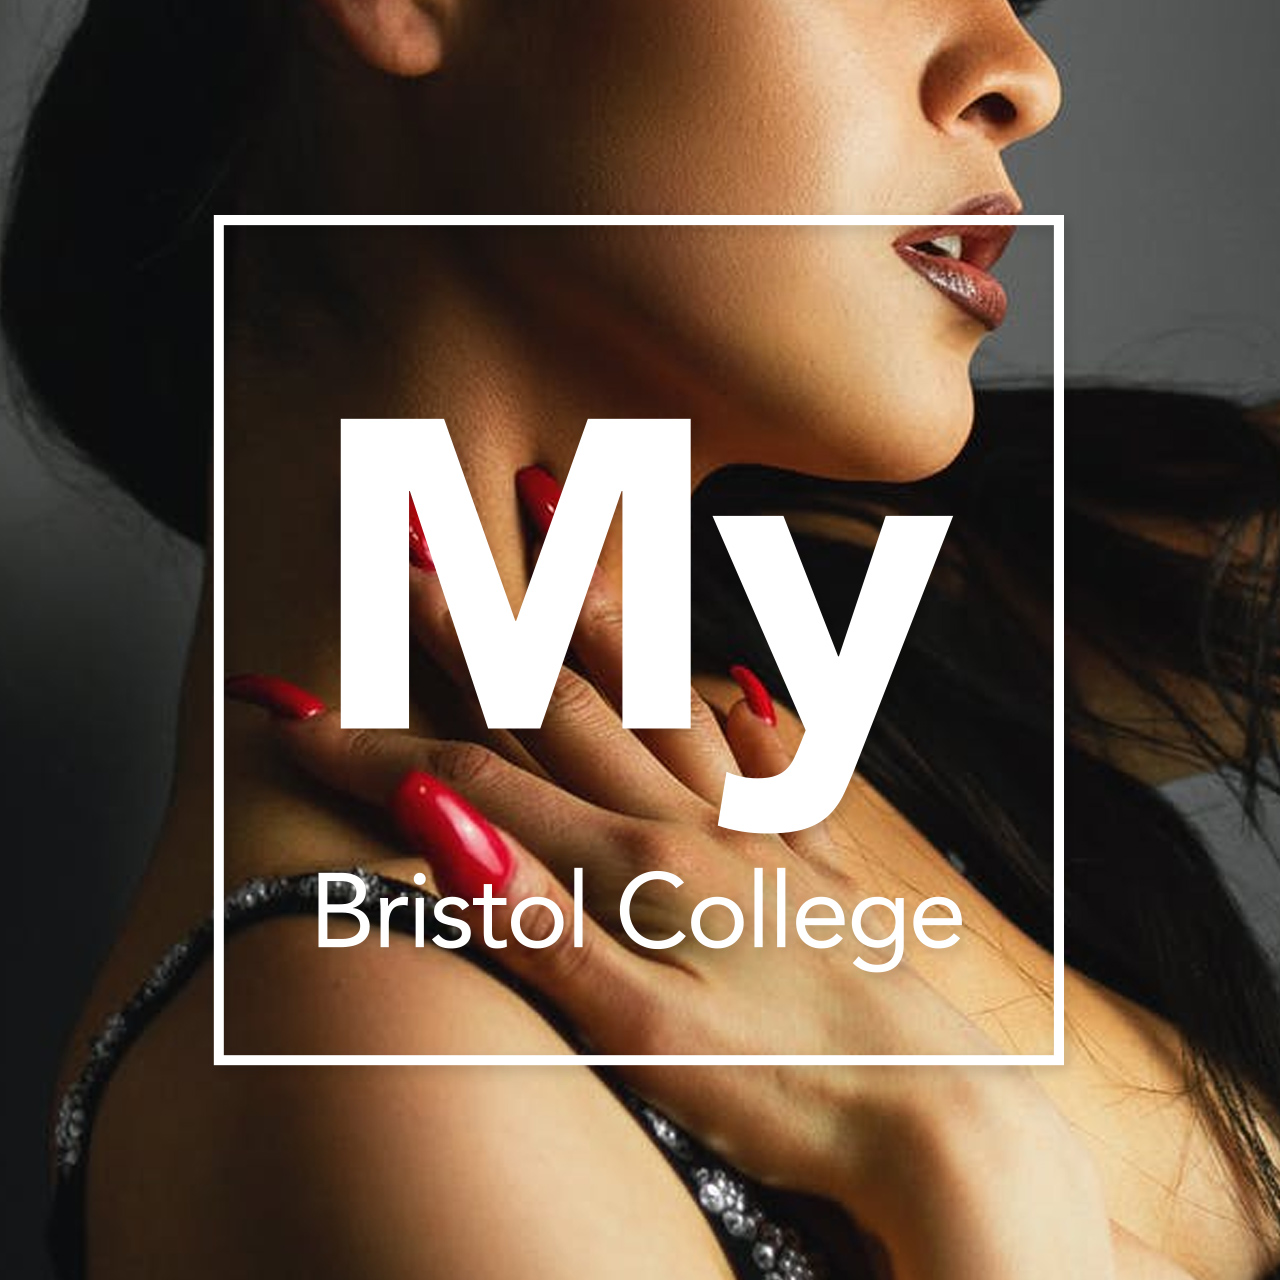 Beauty with City of Bristol College ovelay